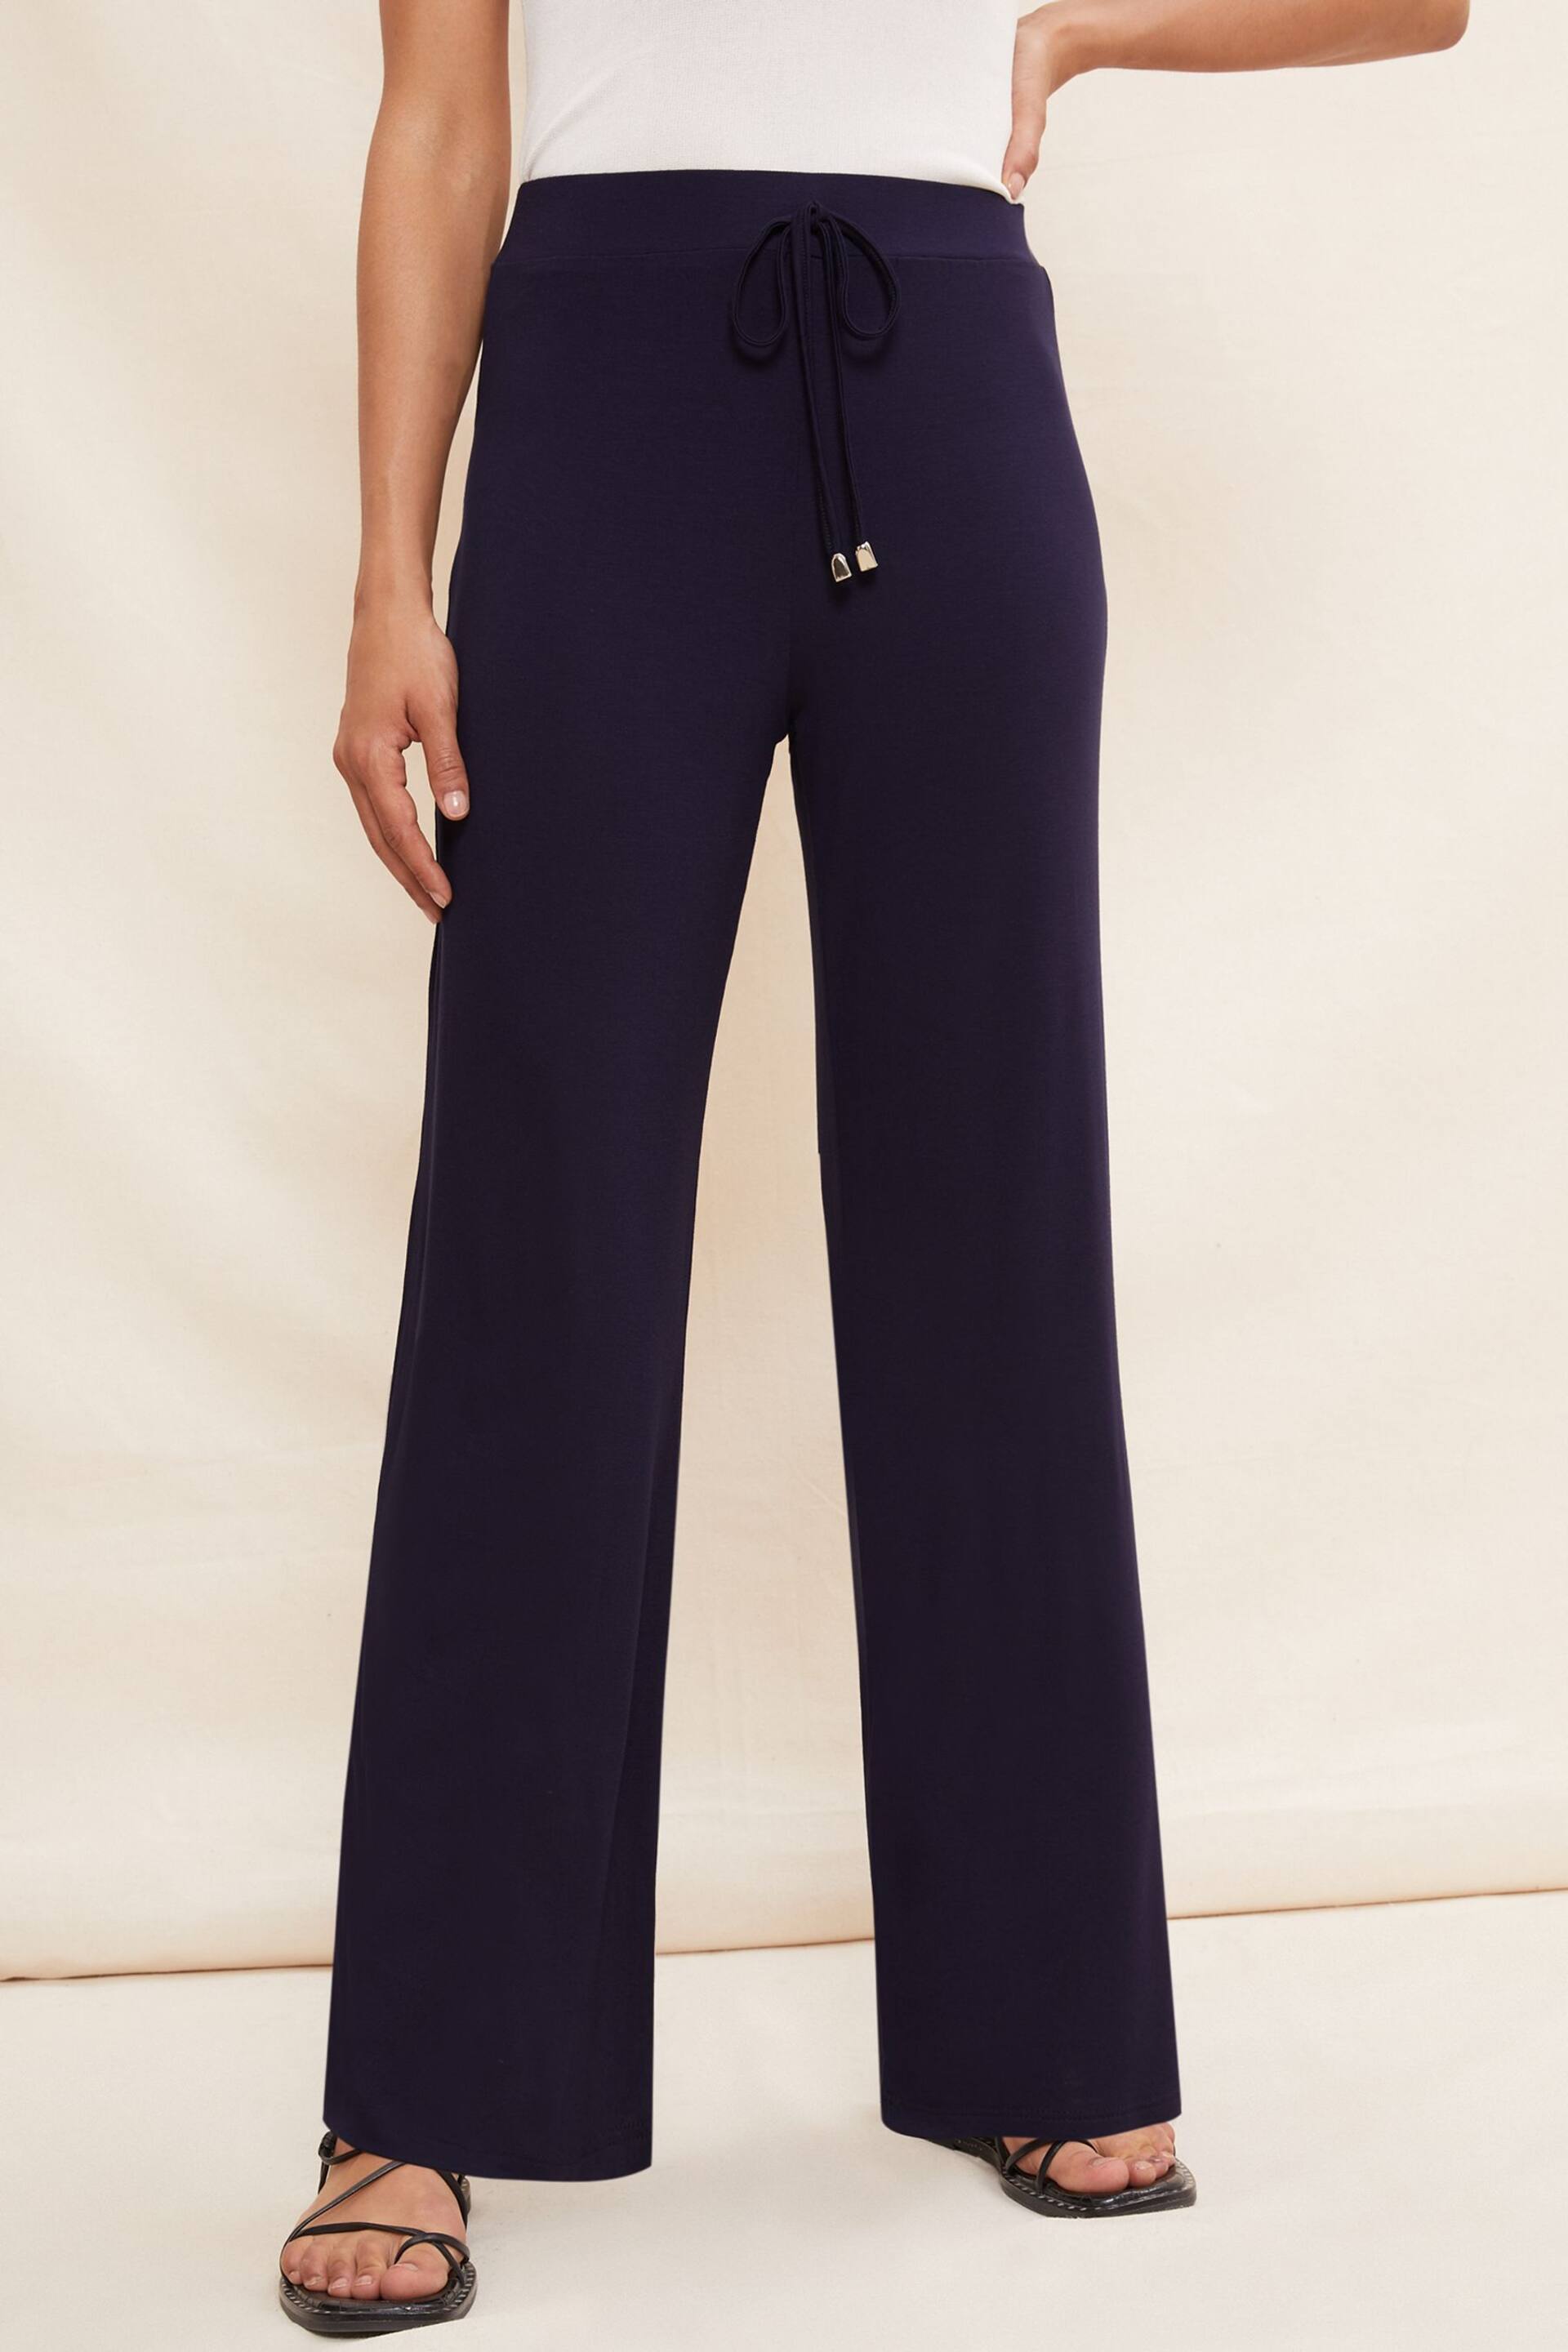 Friends Like These Navy Petite Jersey Wide Leg Trousers - Image 1 of 4